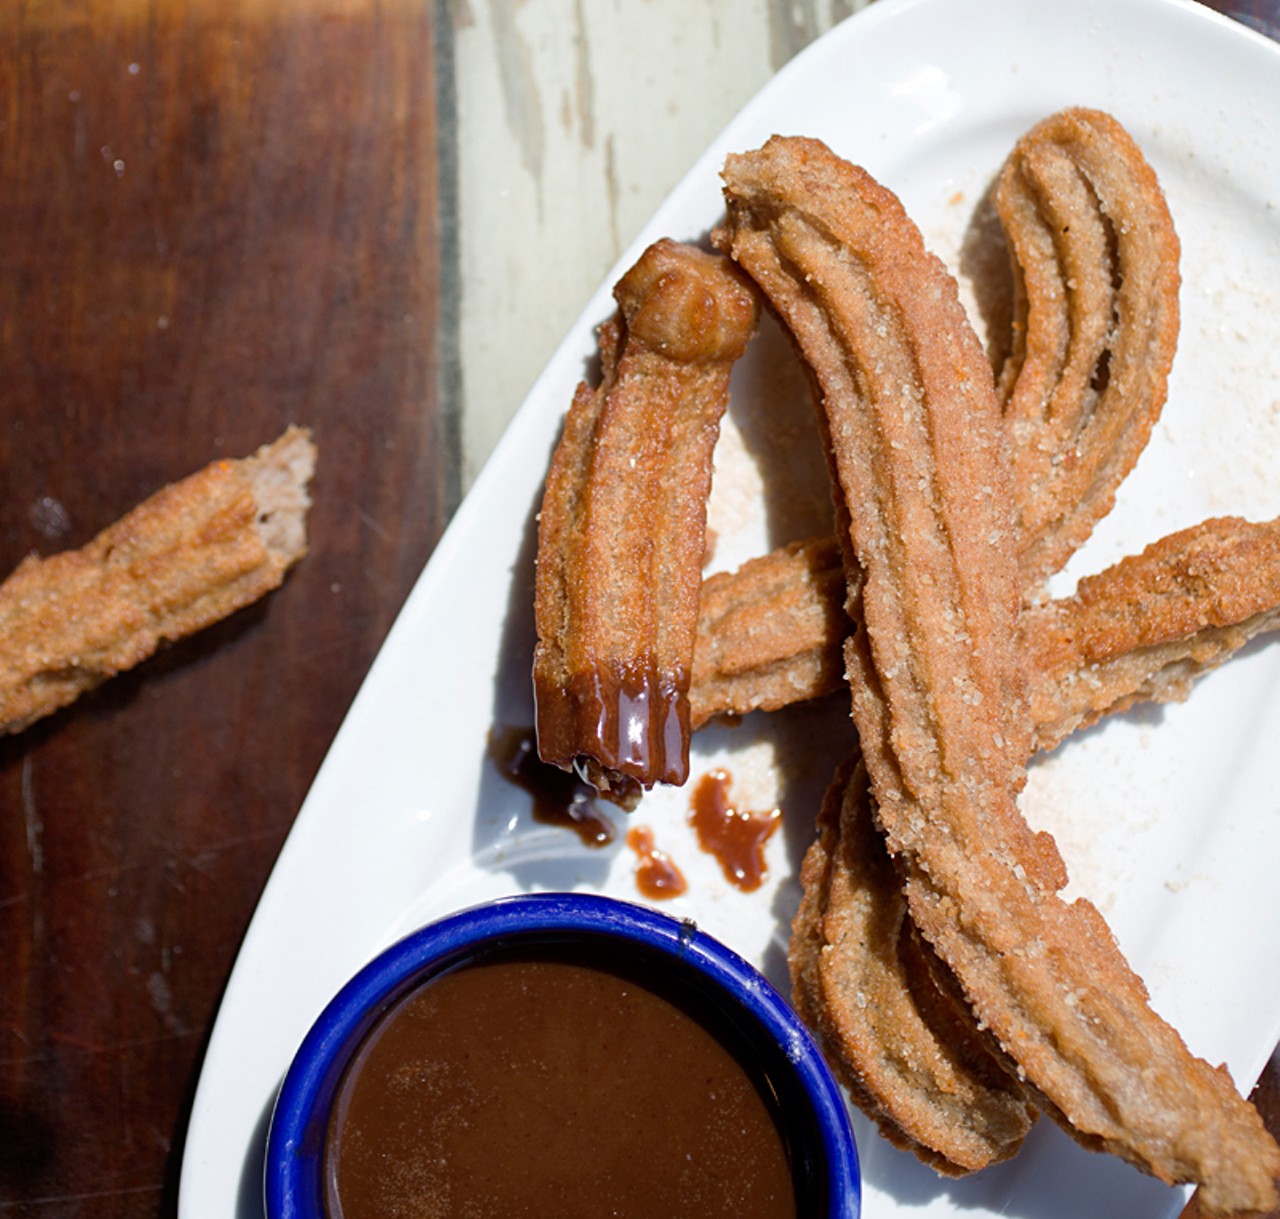 Churros, coated with cinnamon, are made in-house and served with Mexican chocolate sauce.